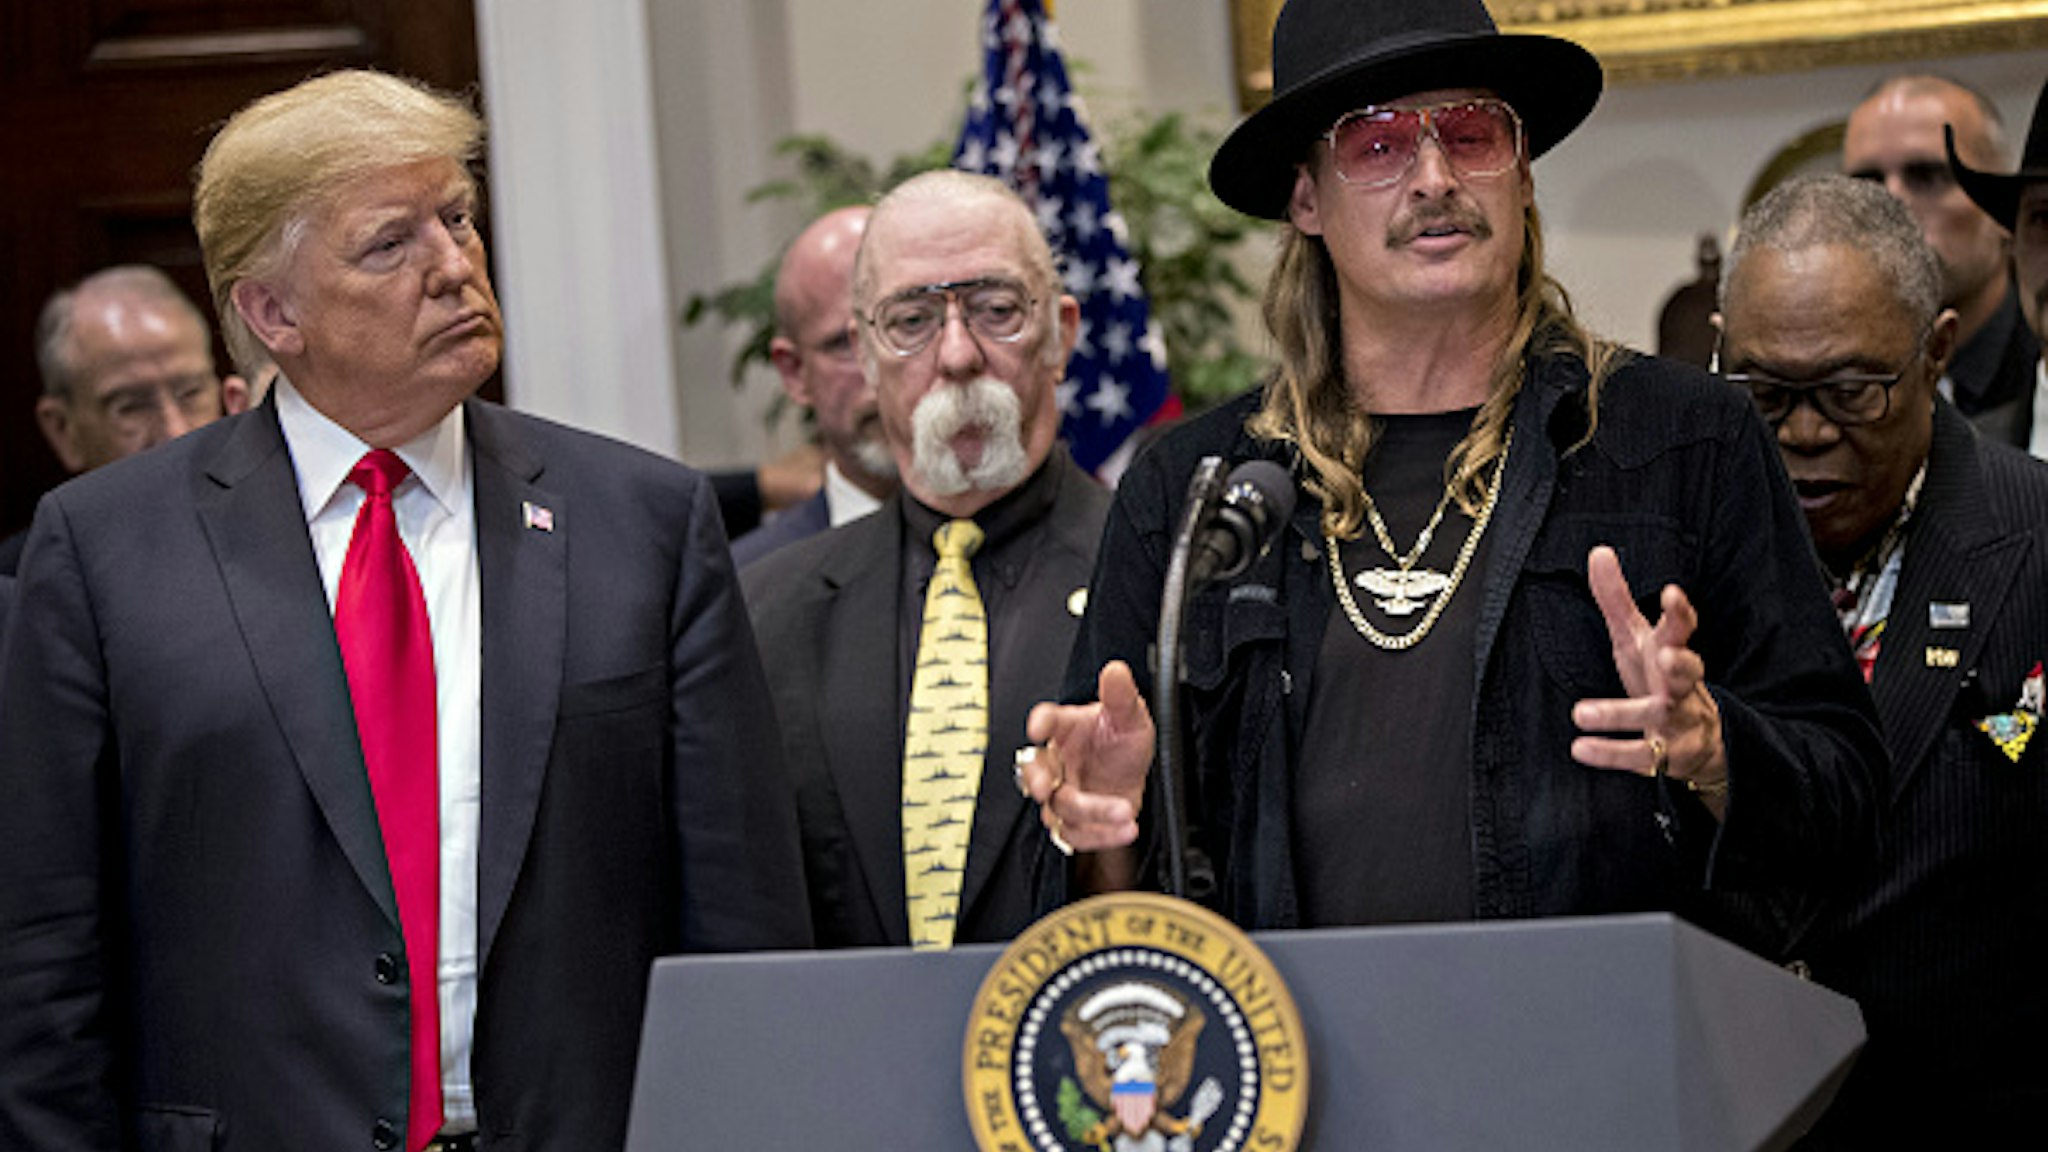 Musician Kid Rock, right, speaks as U.S. President Donald Trump, left, listens during a signing ceremony for H.R. 1551, the Hatch-Goodlatte Music Modernization Act, in the Roosevelt Room of the White House in Washington, D.C., U.S., on Thursday, Oct. 11, 2018. Trump on Wednesday said the "Fed has gone crazy" with interest-rate increases this year and doubled-down on Thursday, blaming the nation's "out of control" central bank for a sixth straight day of losses in U.S. equities. Still, he said, "I'm not going to fire him."